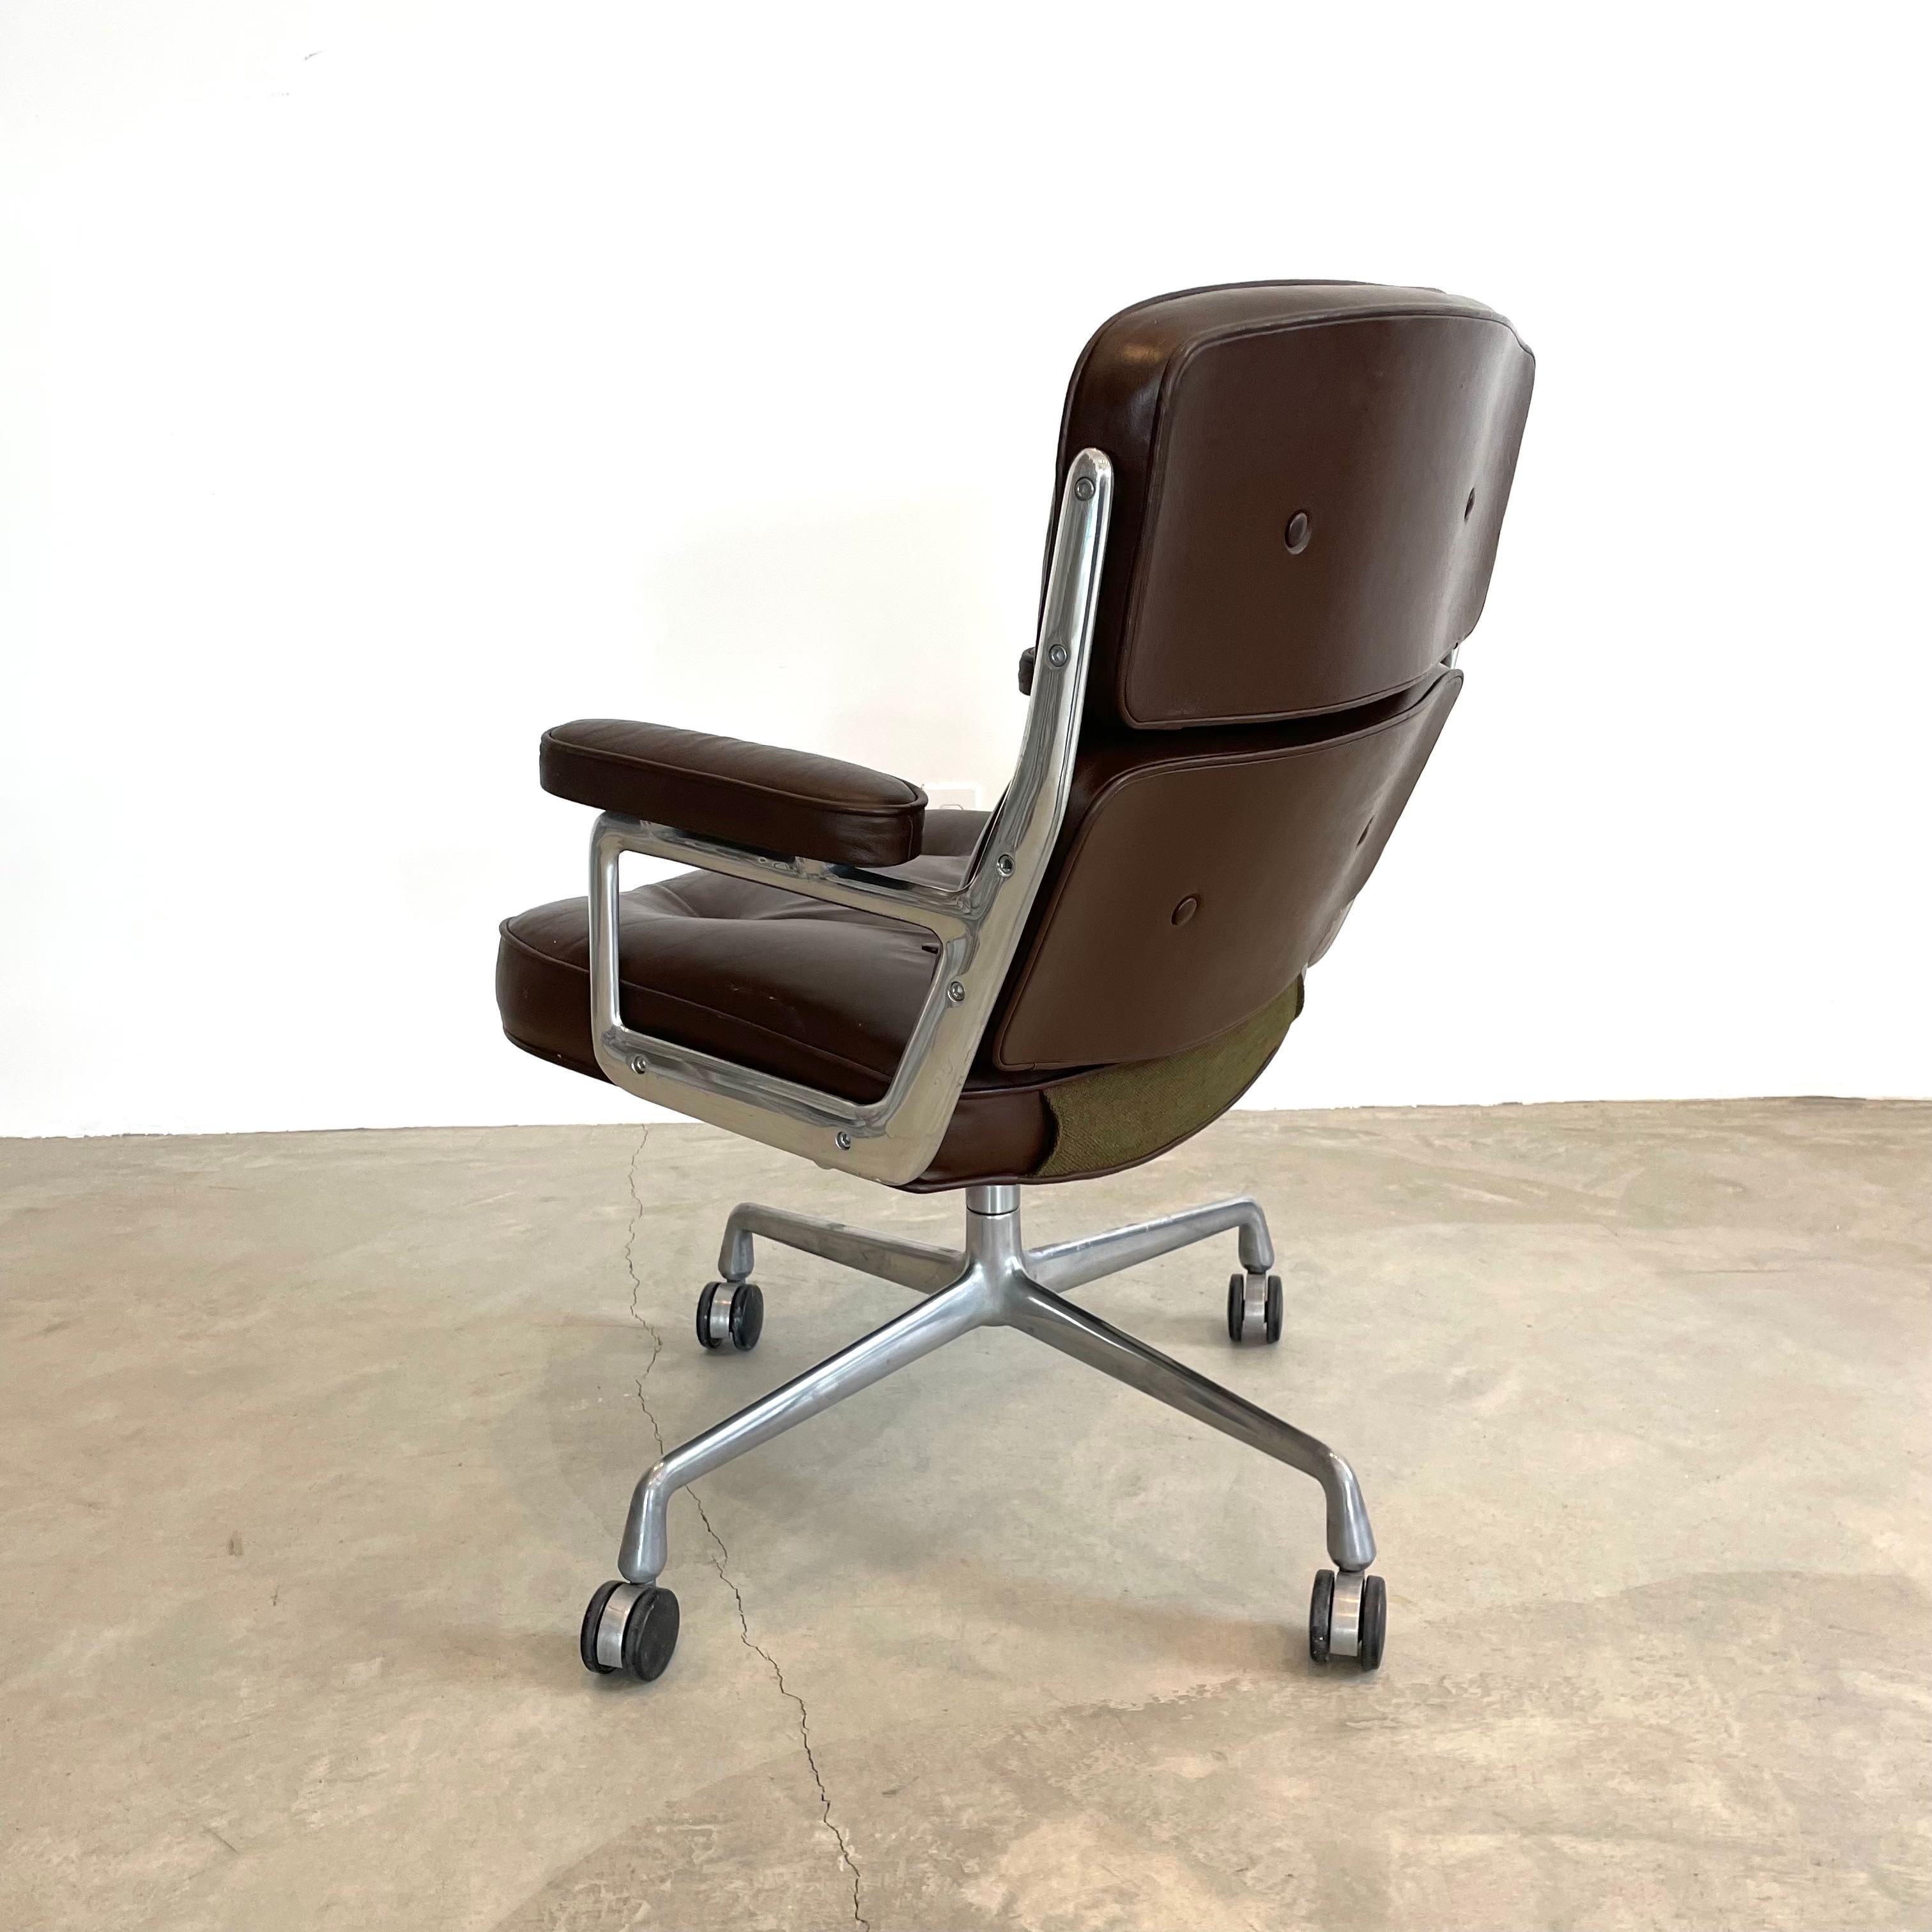 Late 20th Century Eames Time Life Chair in Chocolate Leather for Herman Miller, 1978 USA For Sale